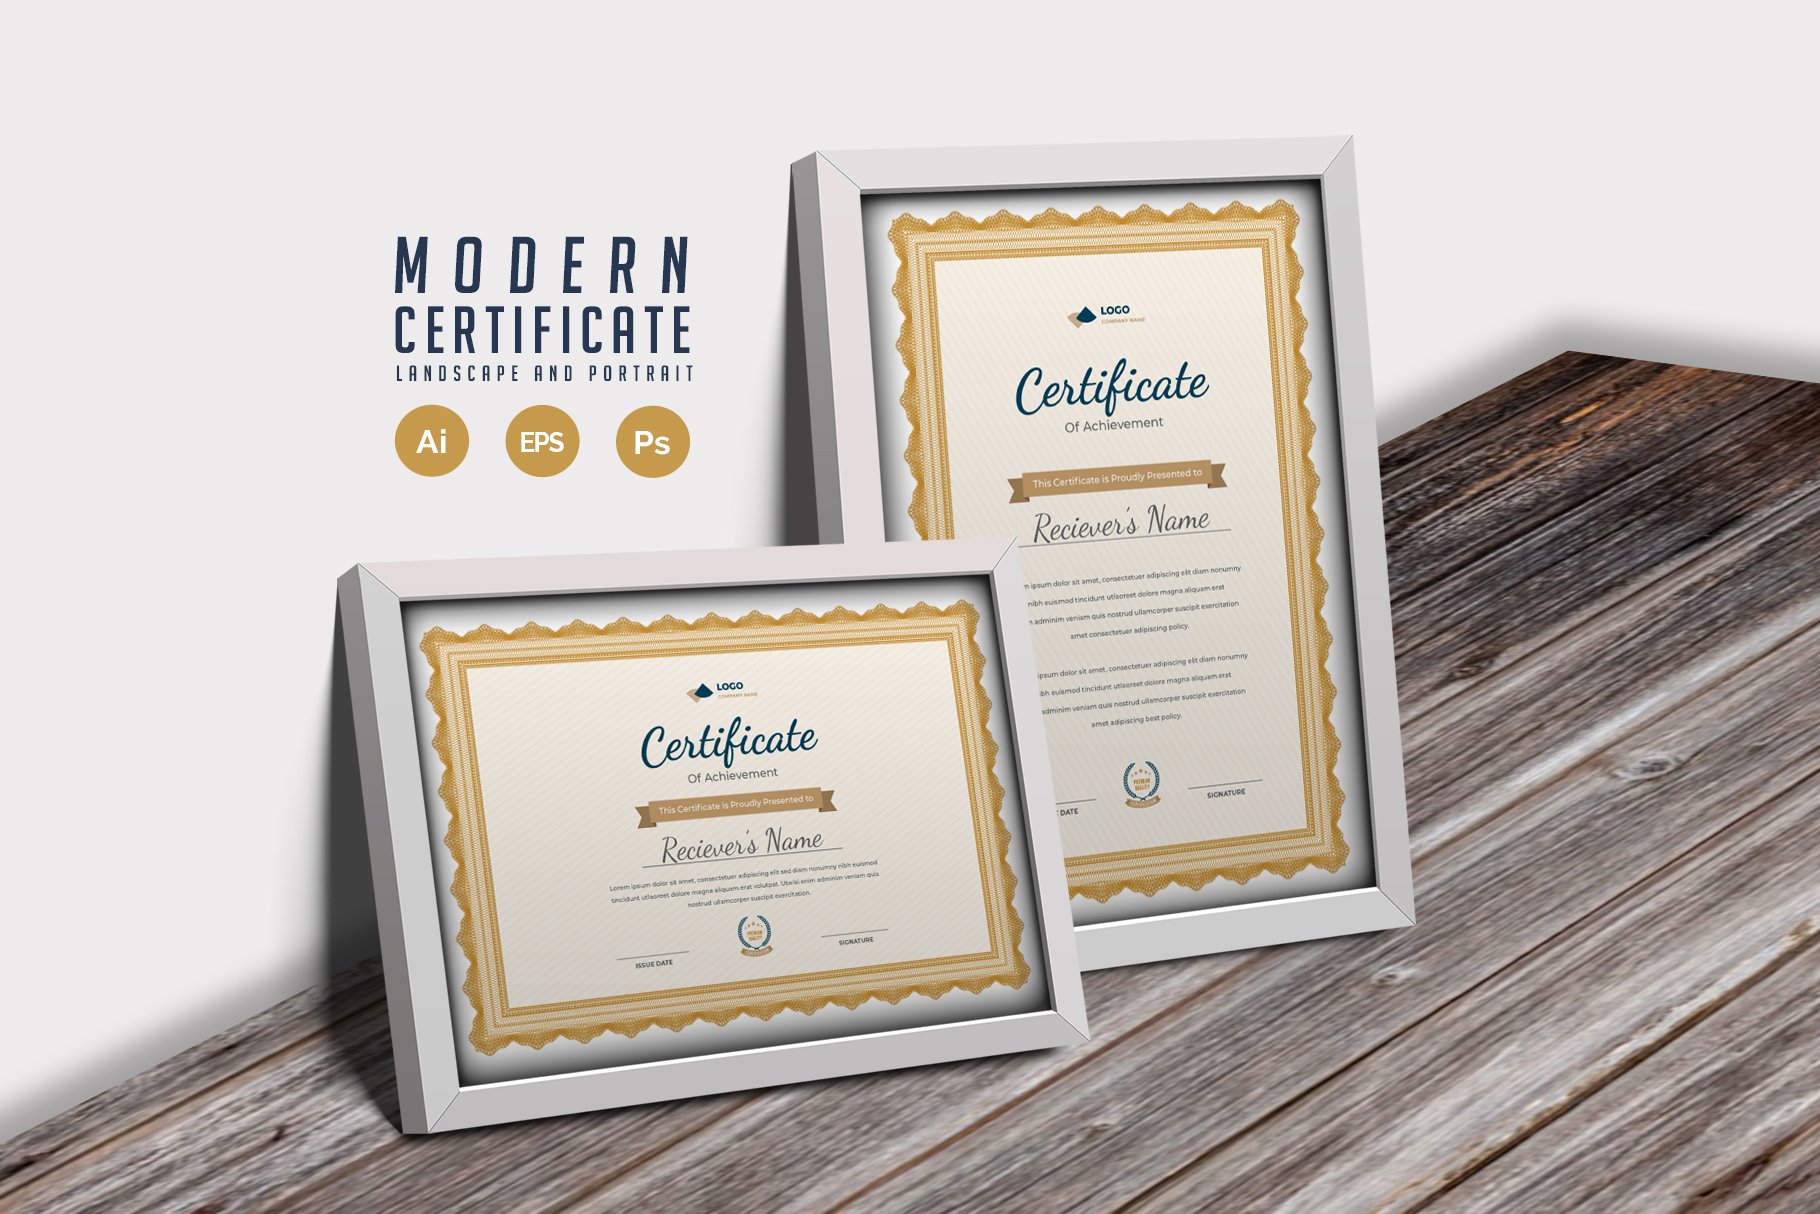 089. Clean Certificate Template cover image.